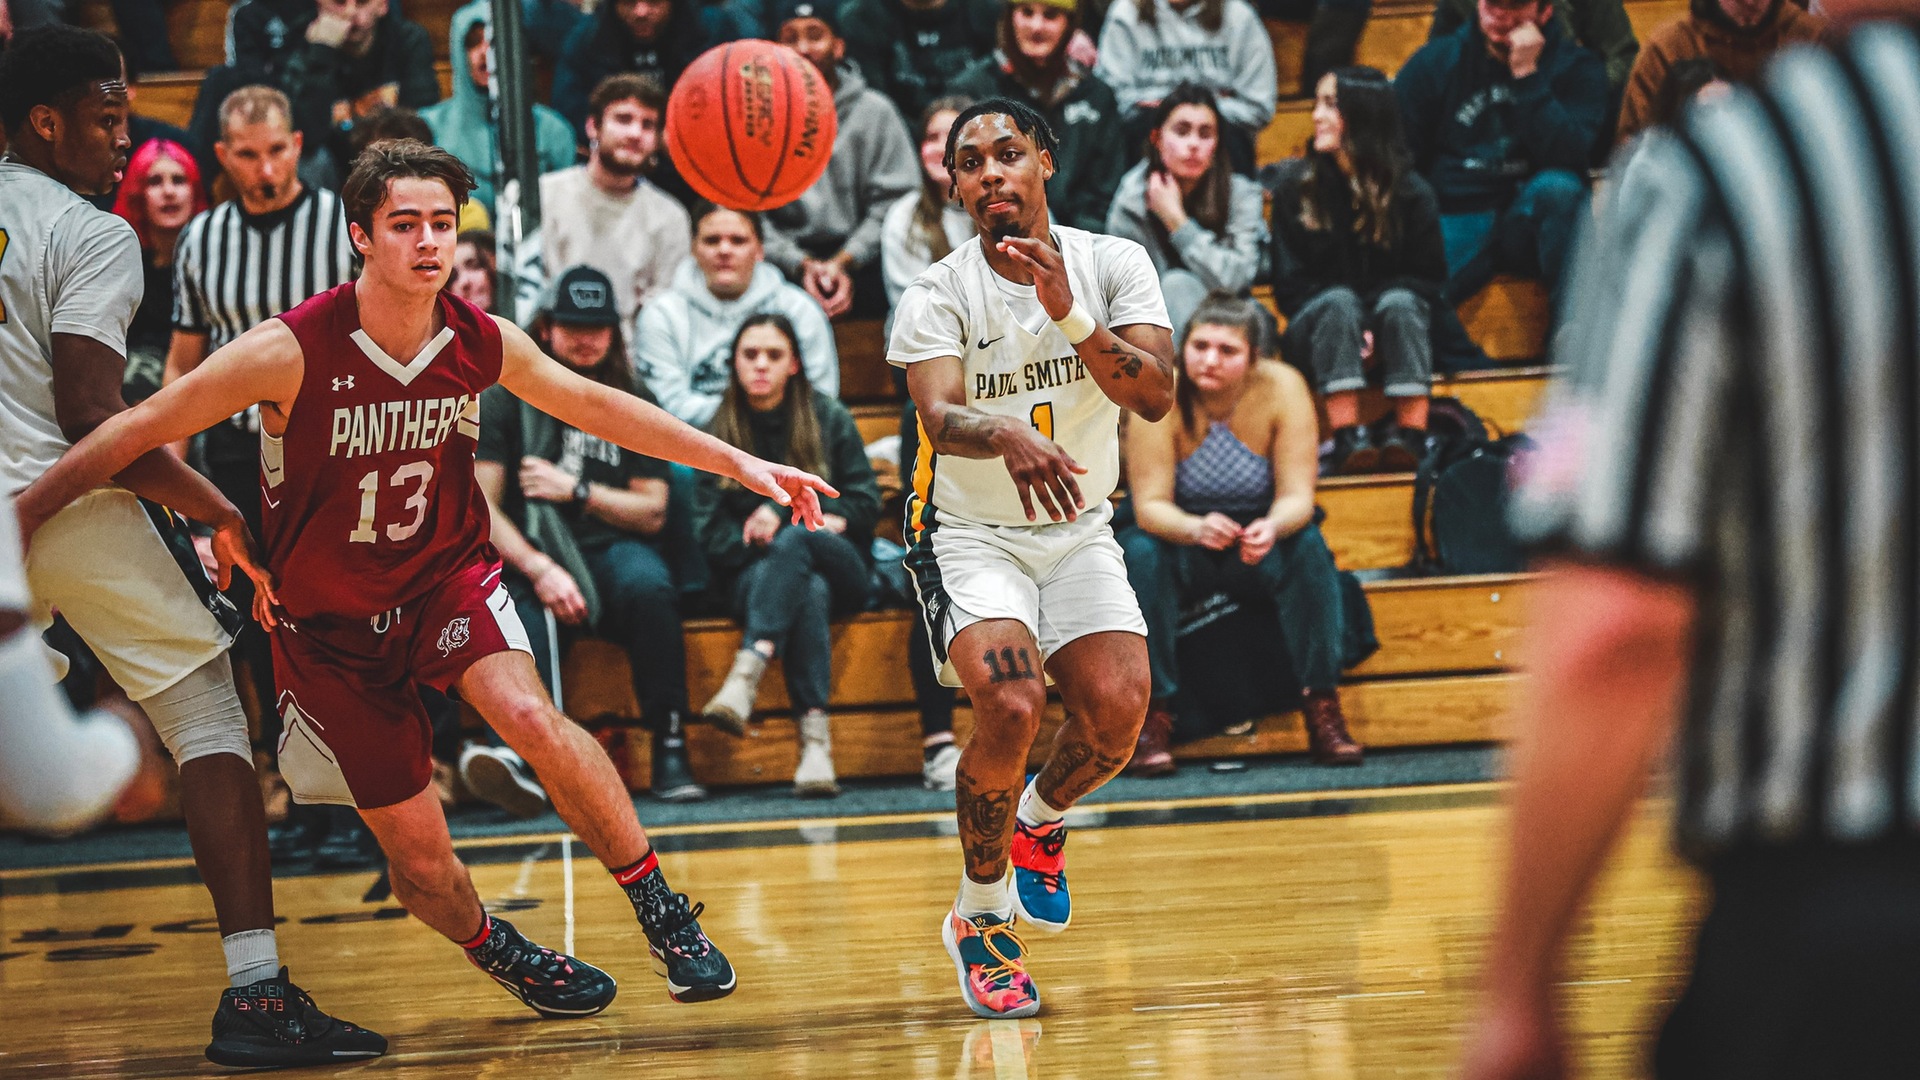 Senior guard Anthony Miller Jr. connects a pass against ACPHS on Friday night in front of a large home crowd (Mercedes Rideout photo). Thumbnail